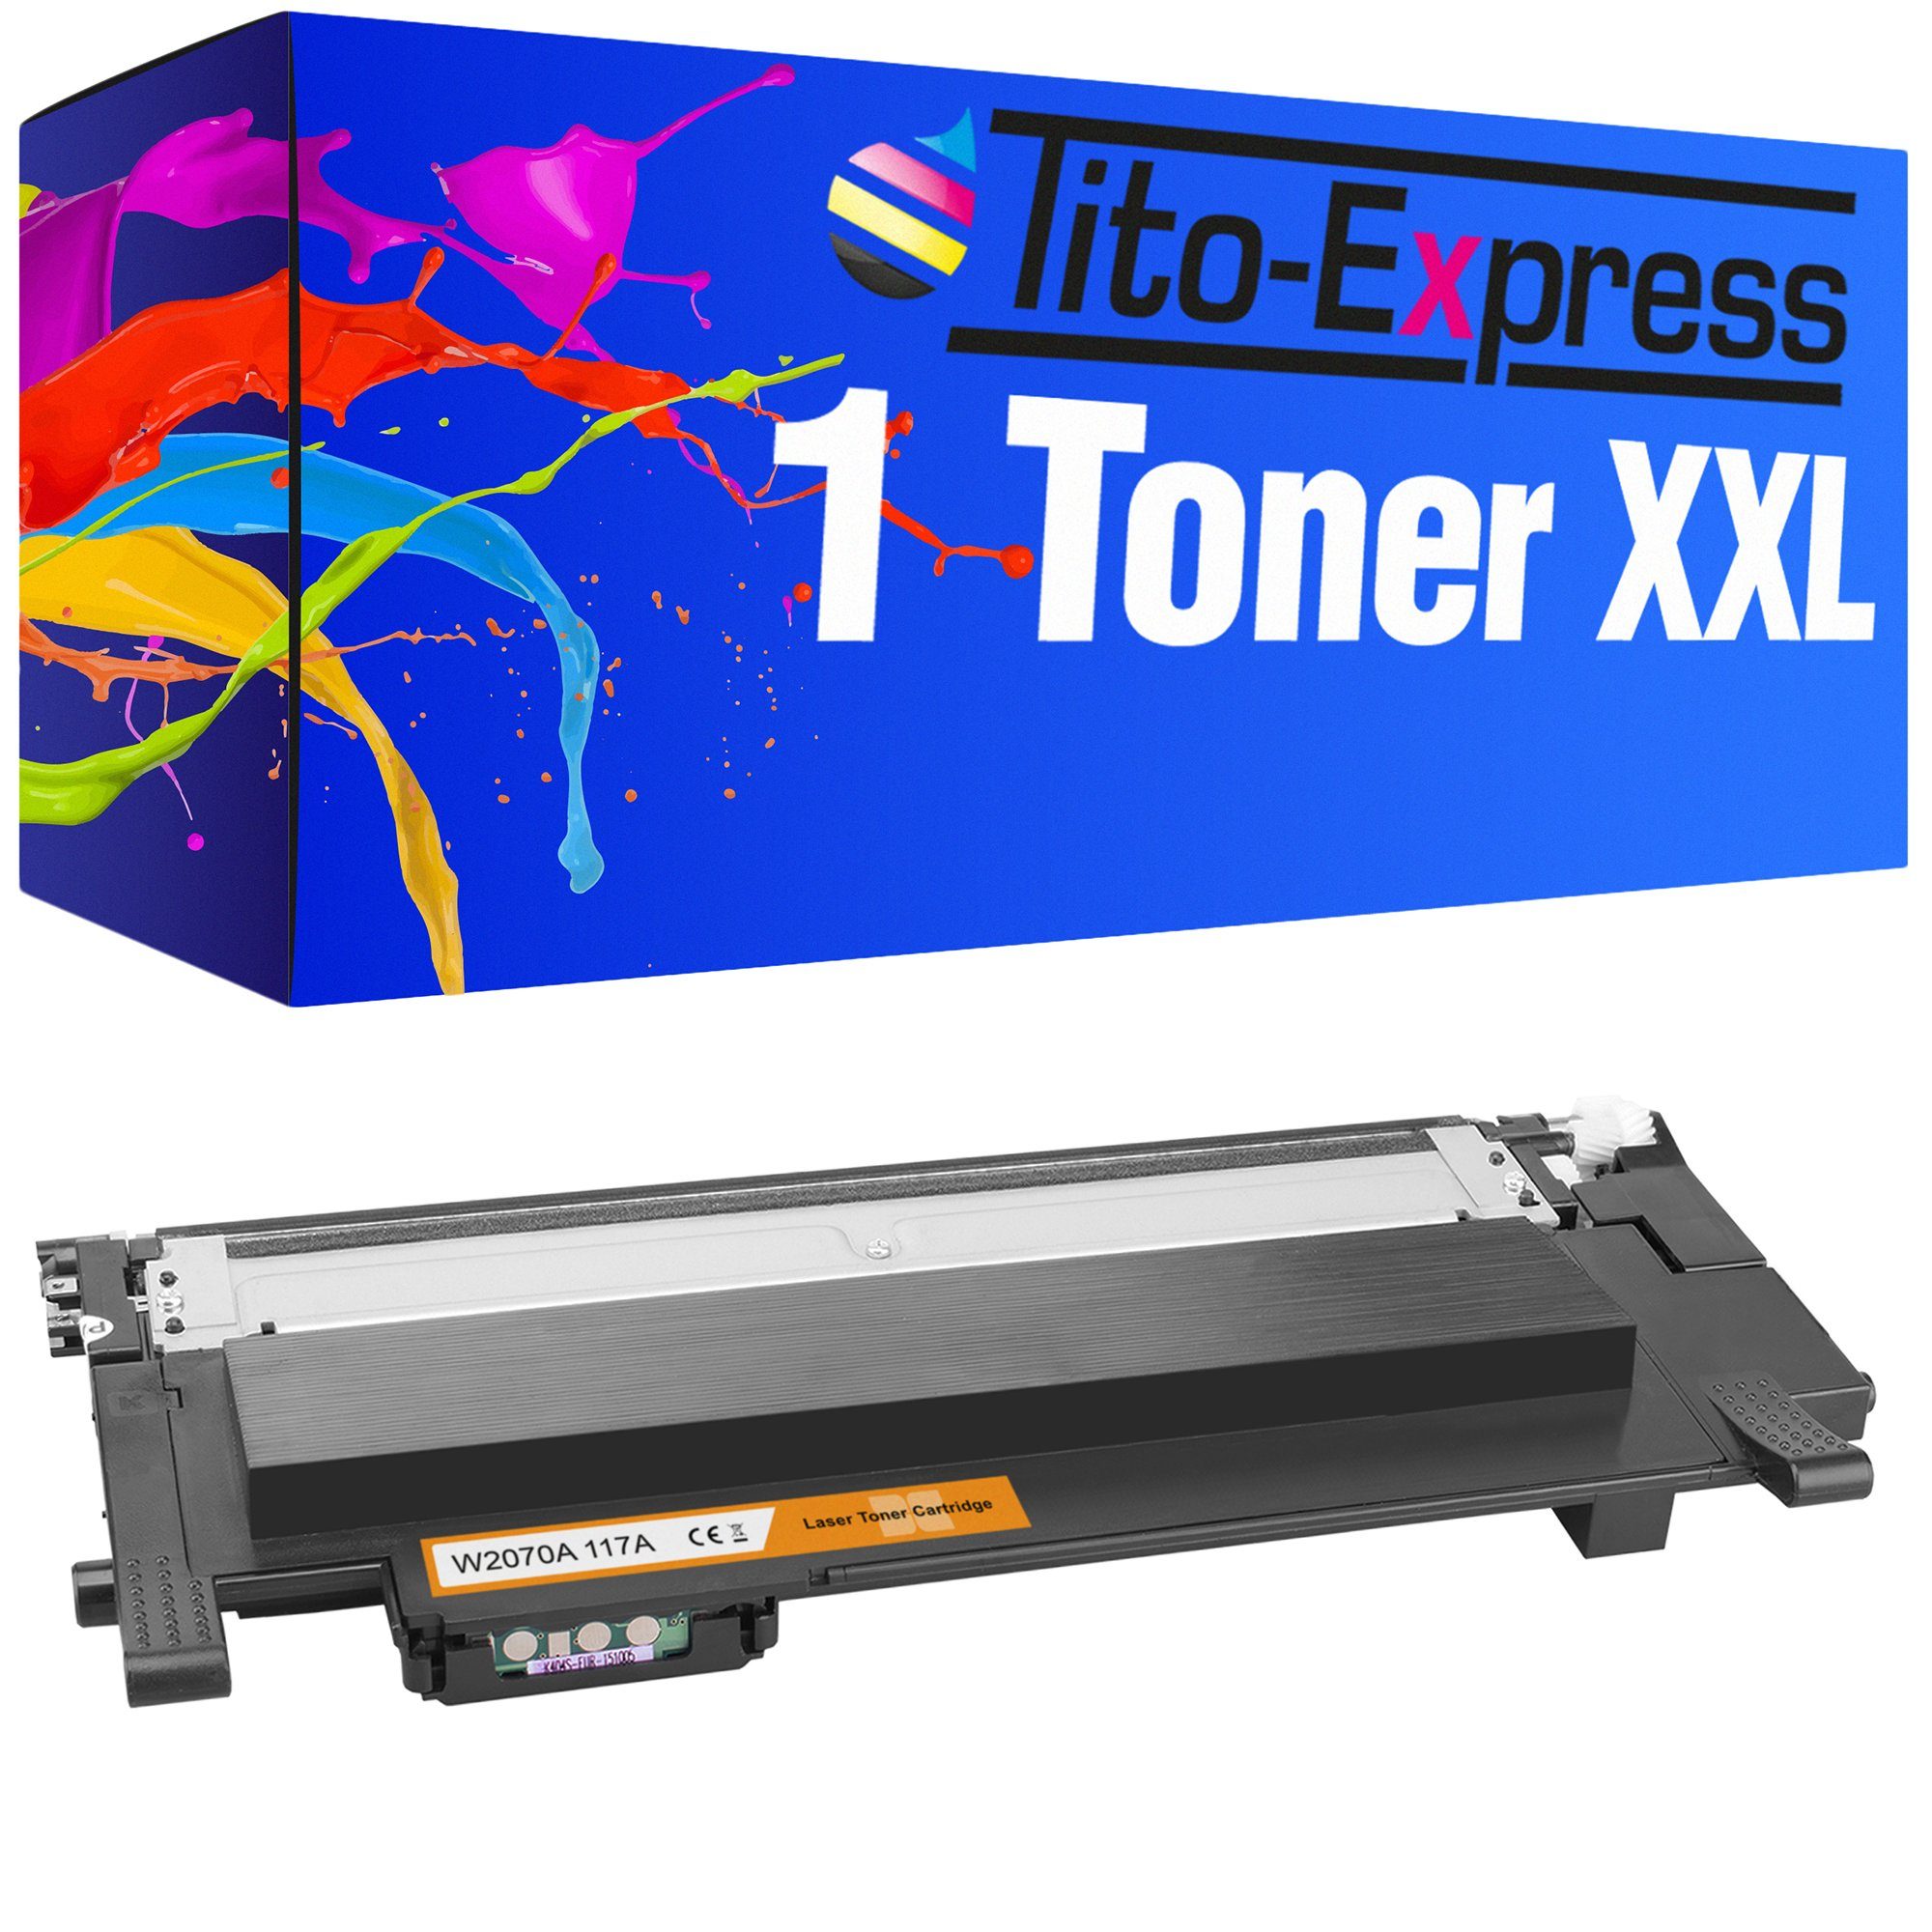 Tito-Express Tonerpatrone ersetzt HP W2070A W 2070 A HP 117A, (1x Black), für Color Laser MFP 178nwg 179fwg 150nw 179fnw 150a 178nw MFP-170